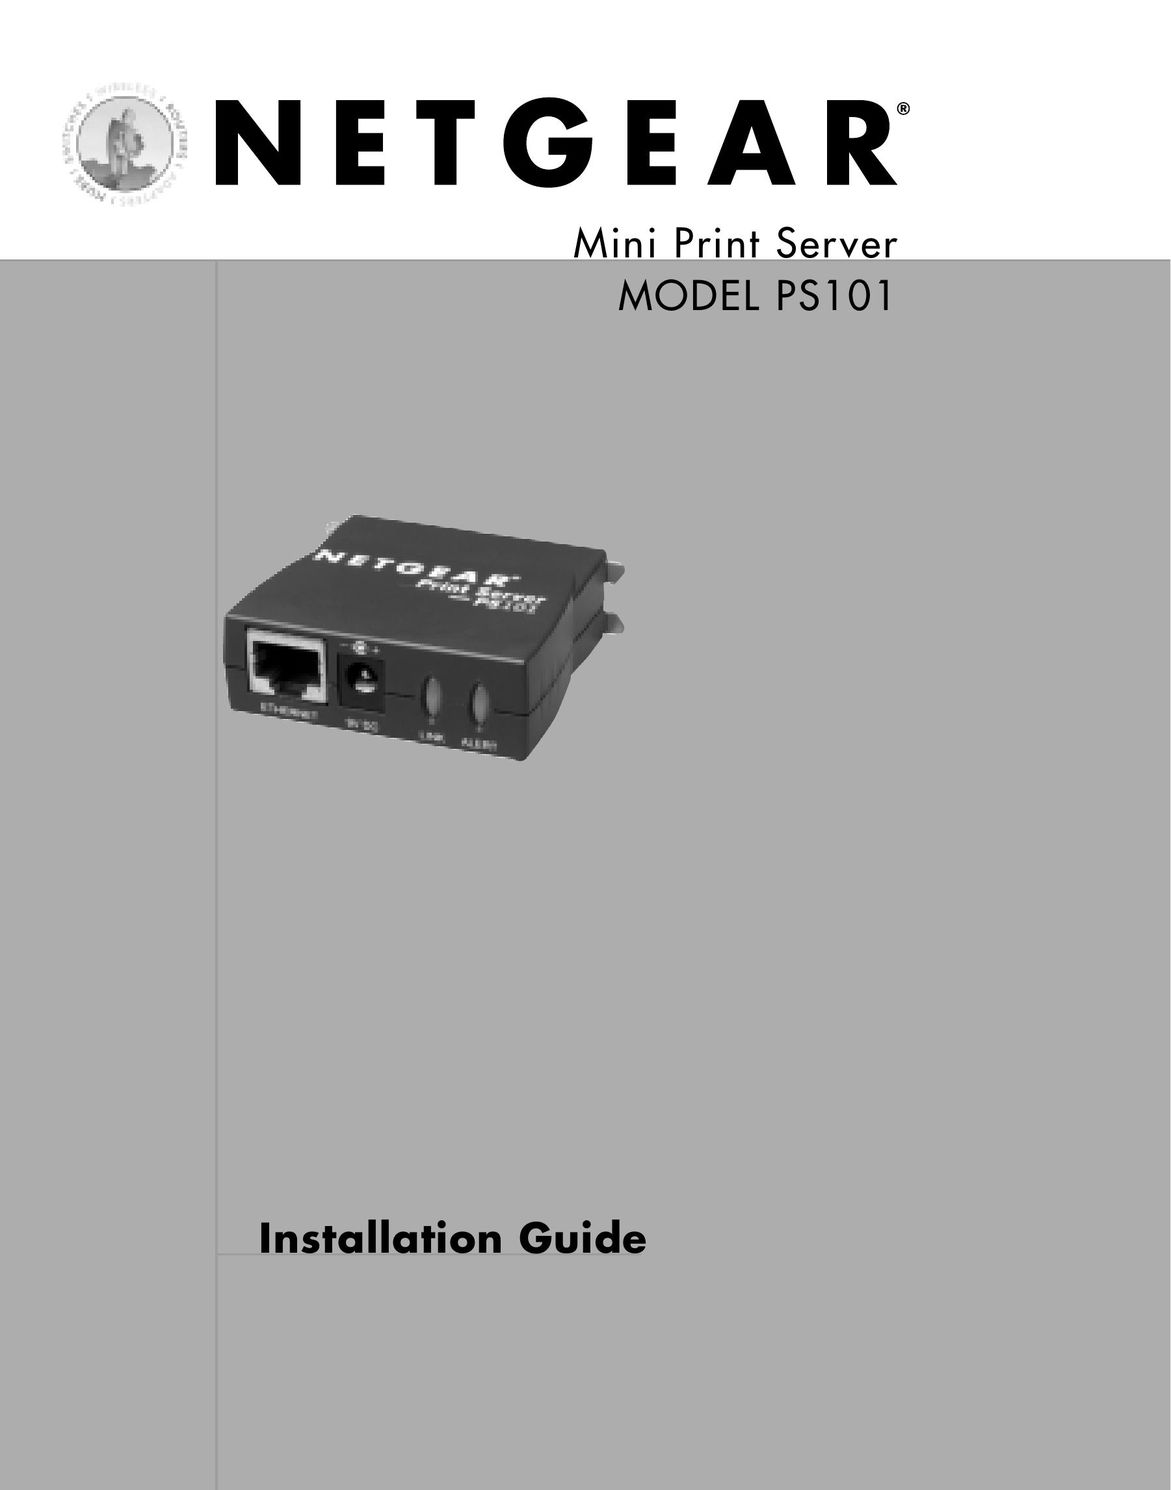 NETGEAR PS101 All in One Printer User Manual